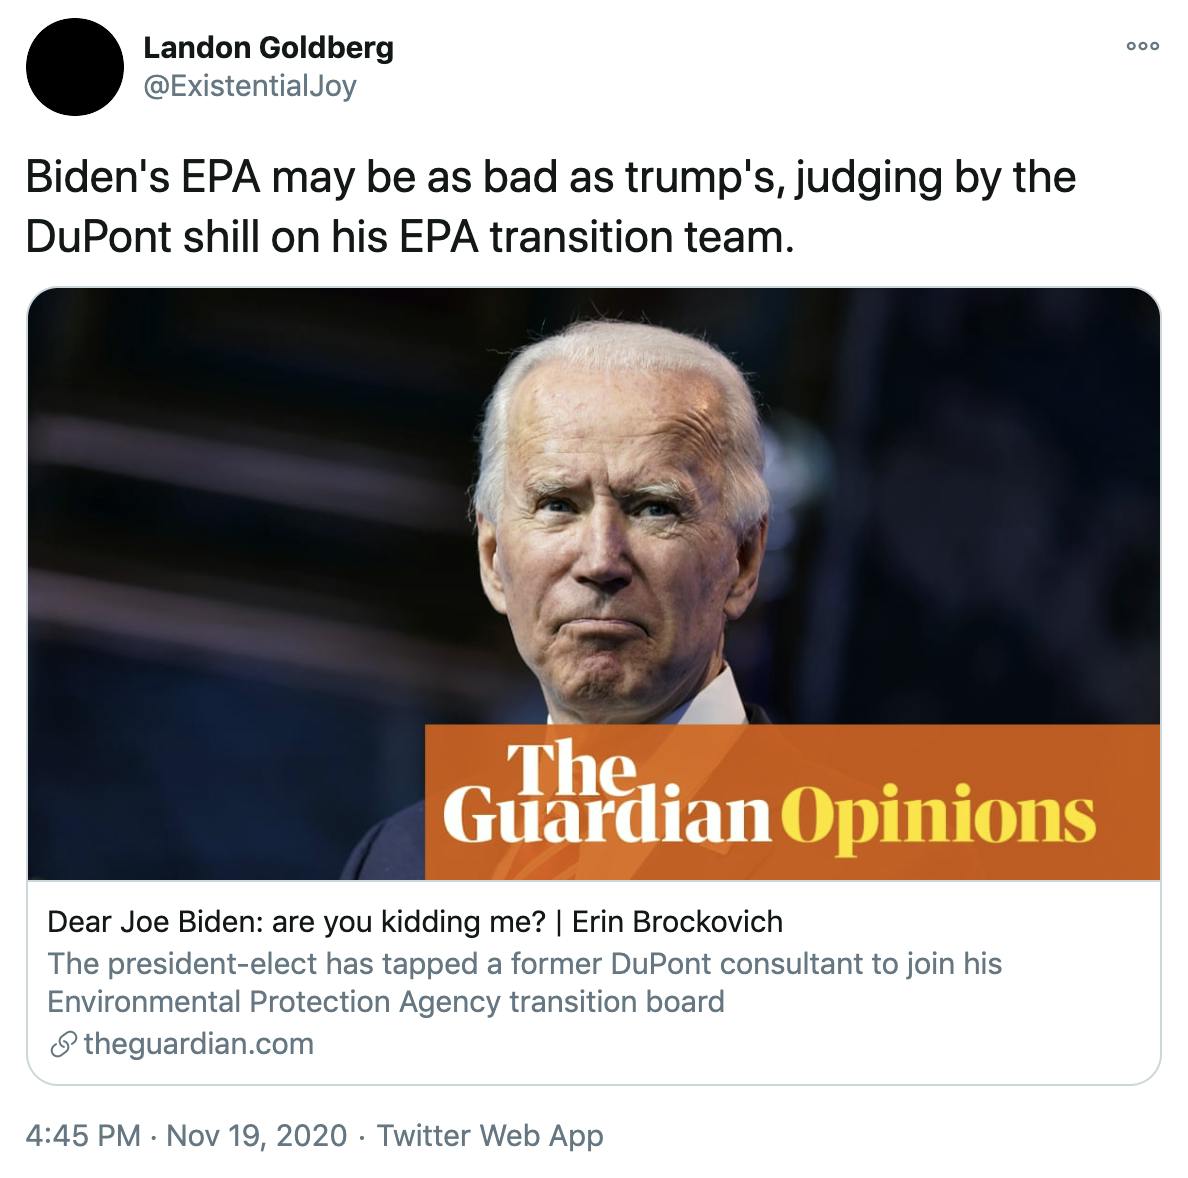 Biden's EPA may be as bad as trump's, judging by the DuPont shill on his EPA transition team.